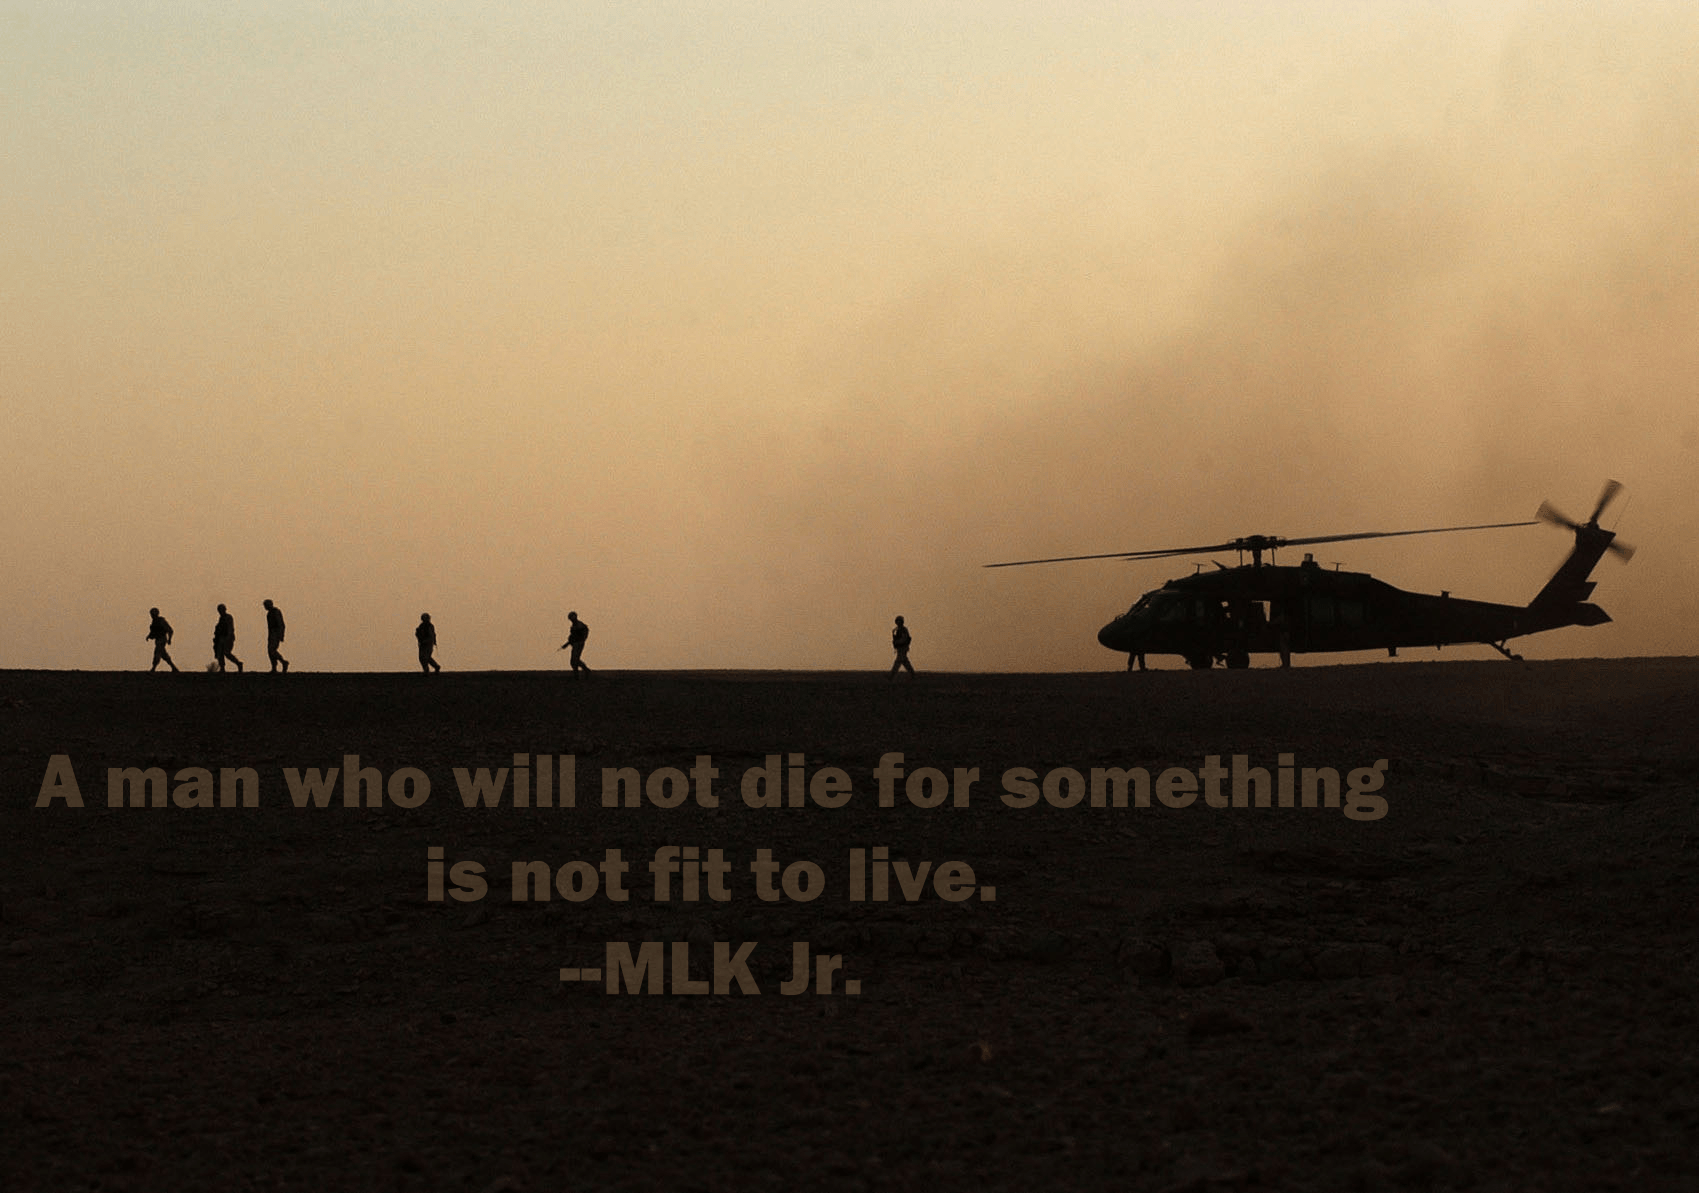 US Military Inspirational Wallpaper Free US Military